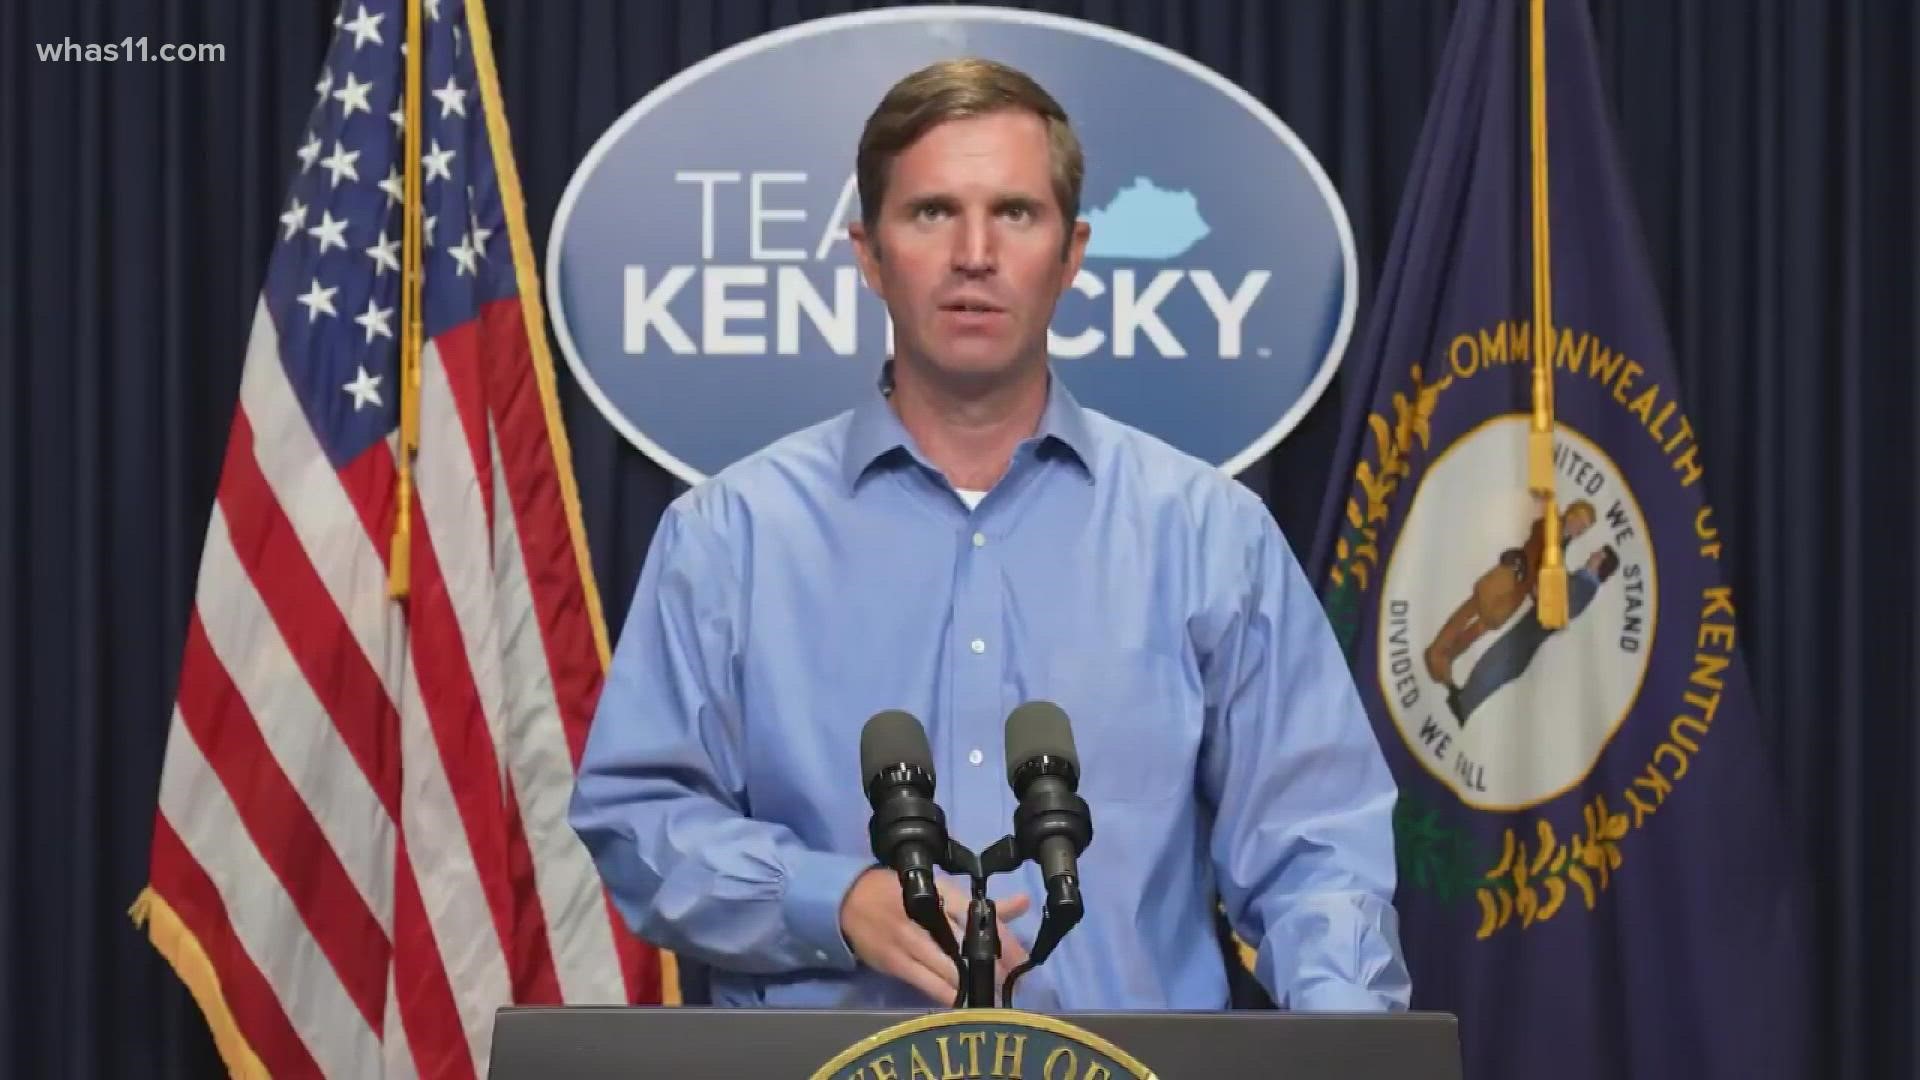 In a video posted on Twitter, Governor Andy Beshear announced more than 2,500 new cases and 10 deaths.